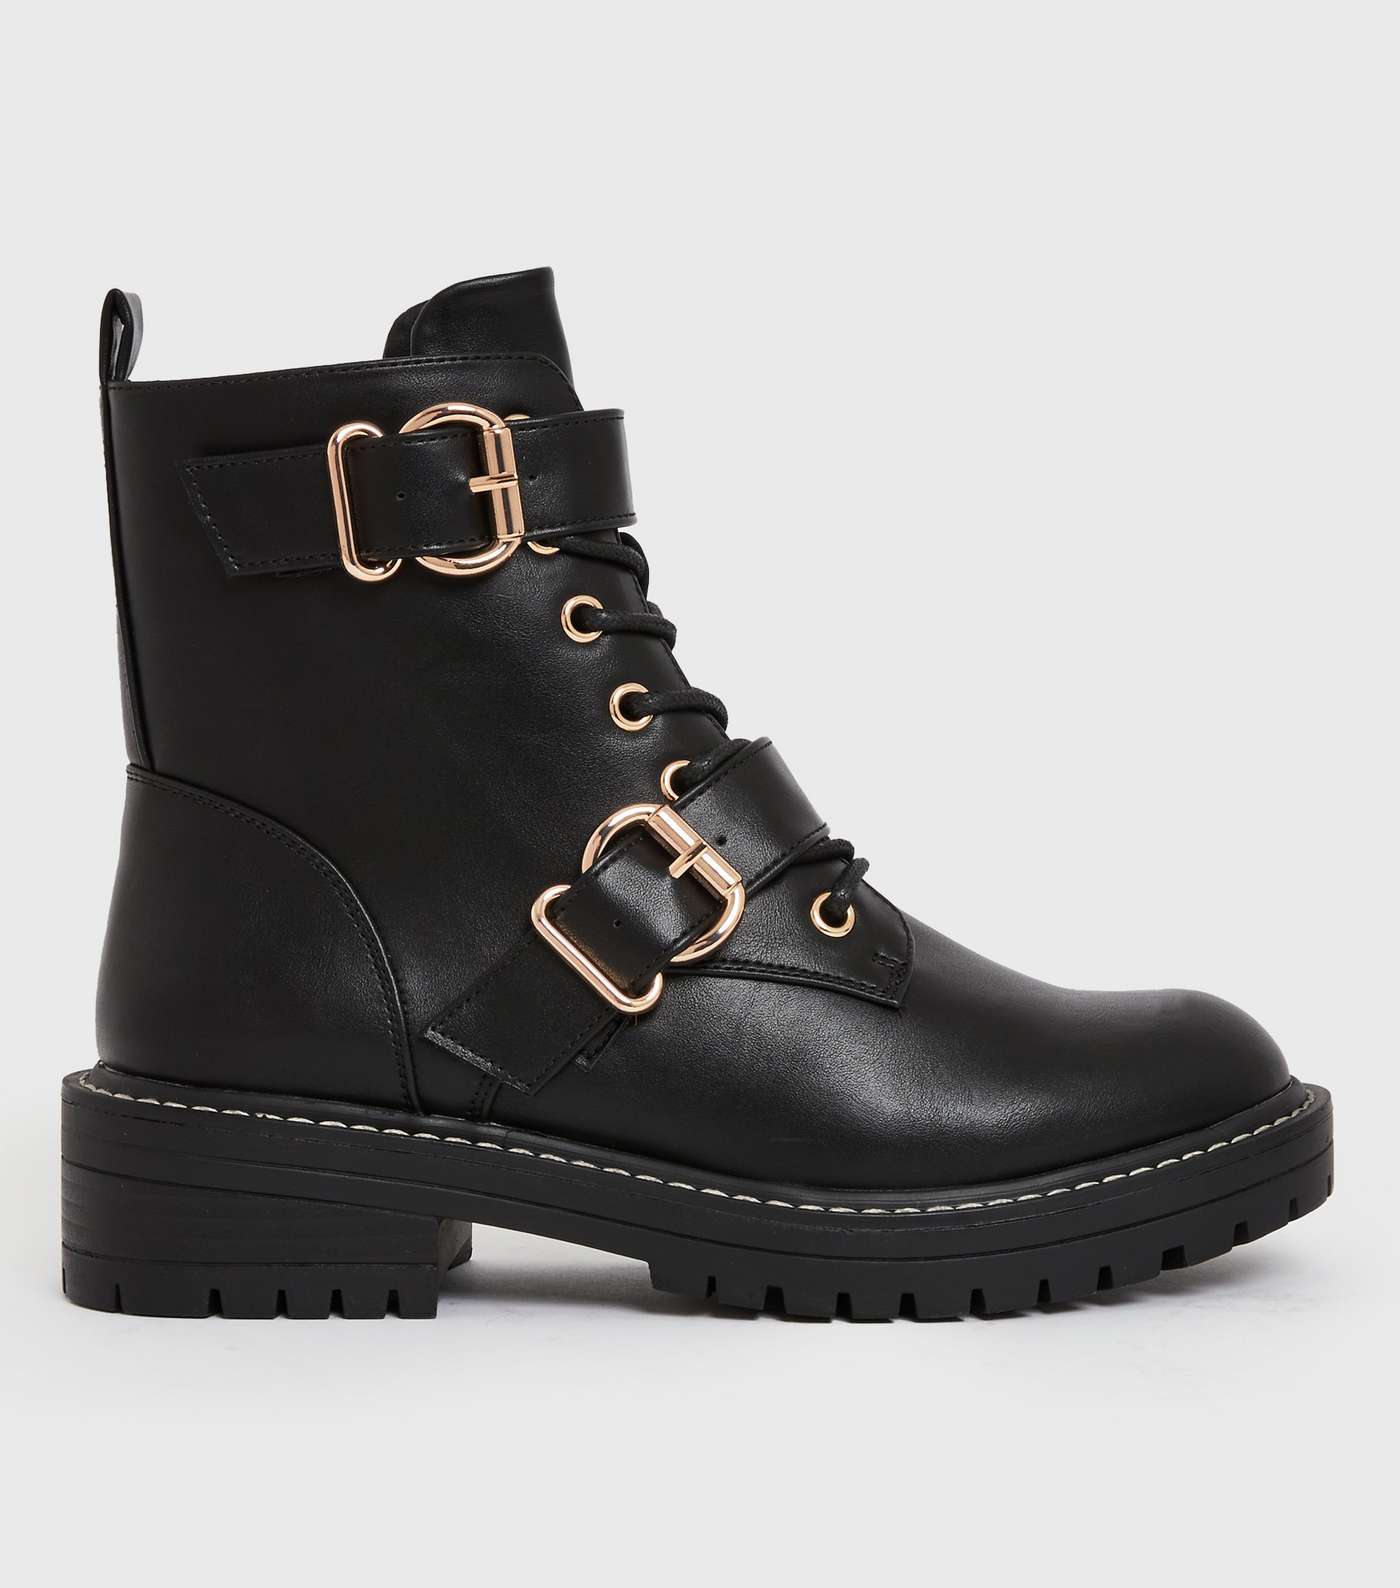 Girls Black Lace Up Buckle Chunky Biker Boots